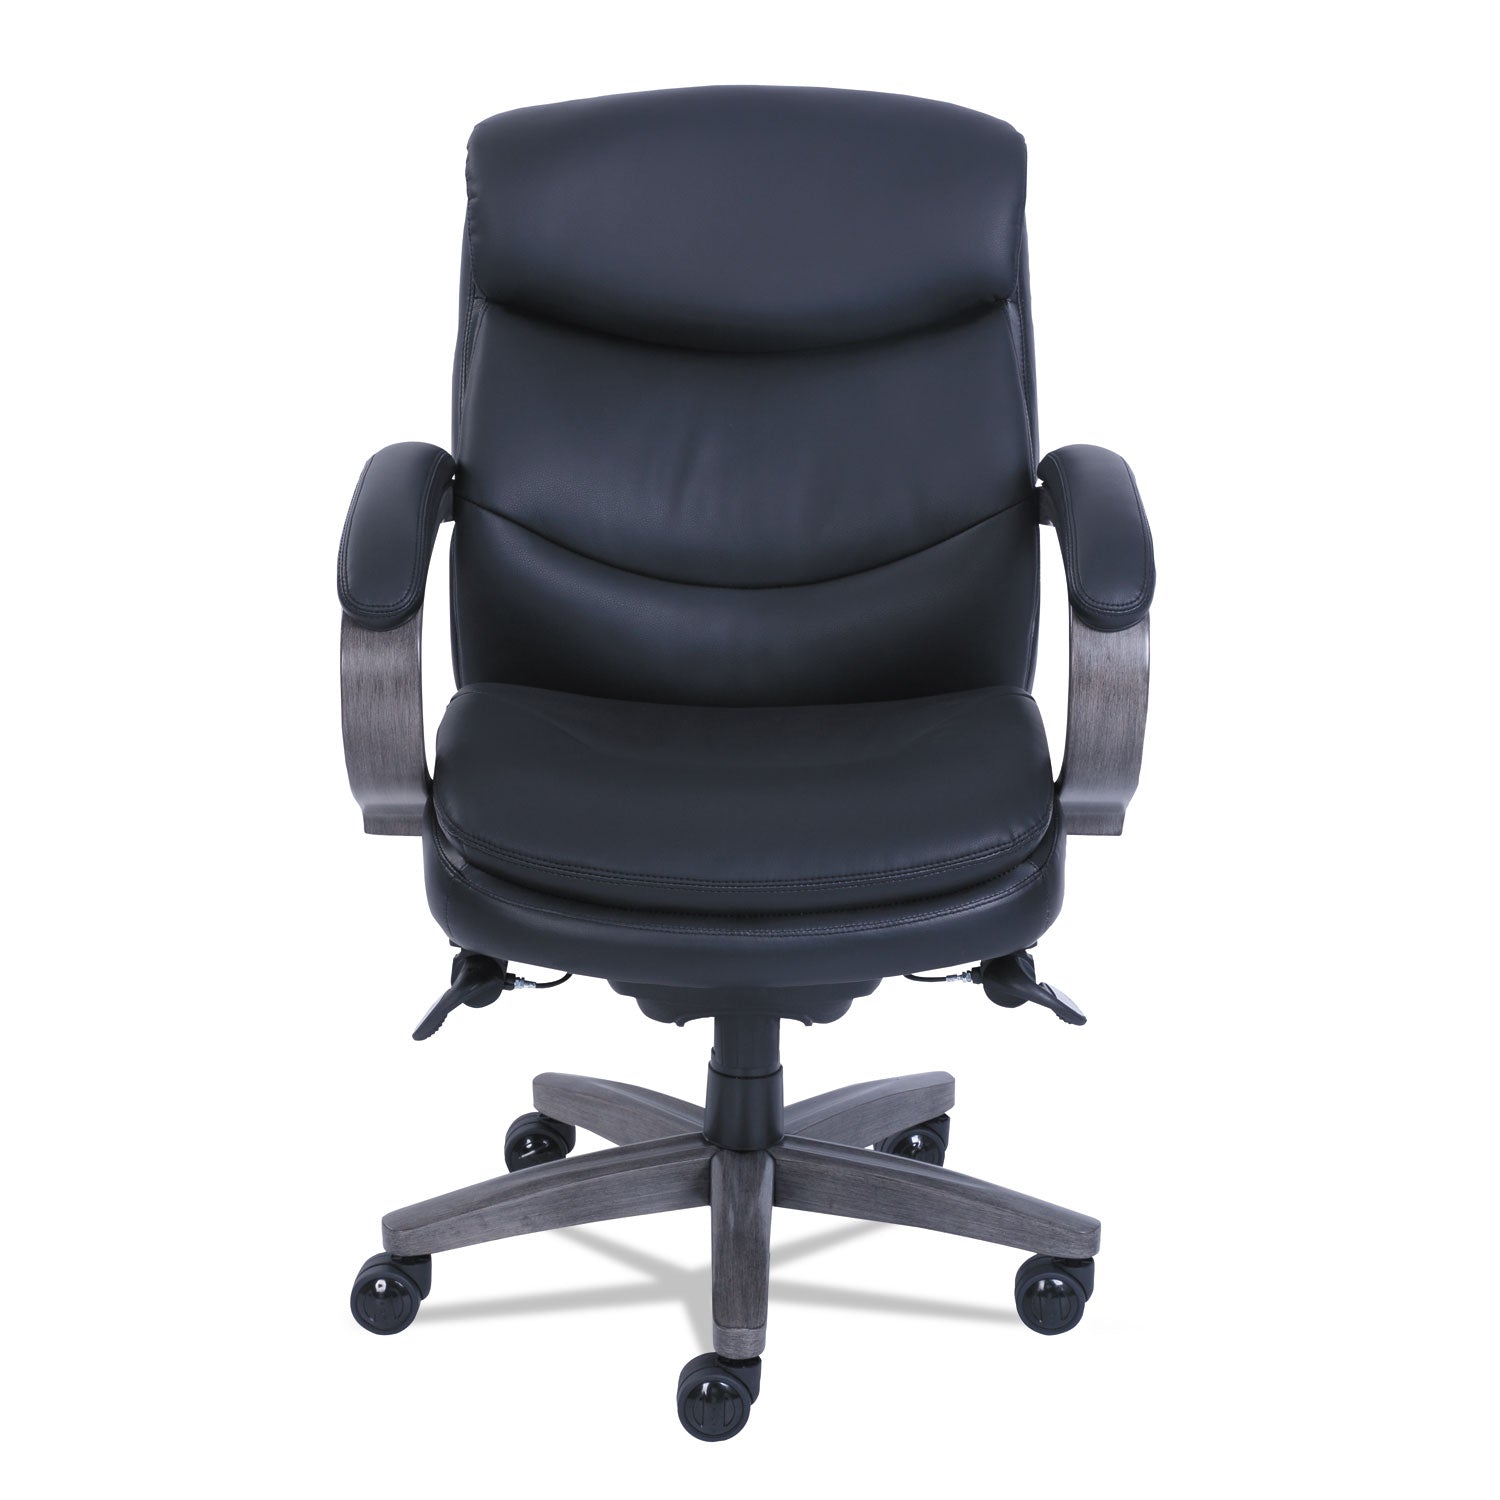 woodbury-mid-back-executive-chair-supports-up-to-300-lb-1875-to-2175-seat-height-black-seat-back-weathered-gray-base_lzb48963a - 2